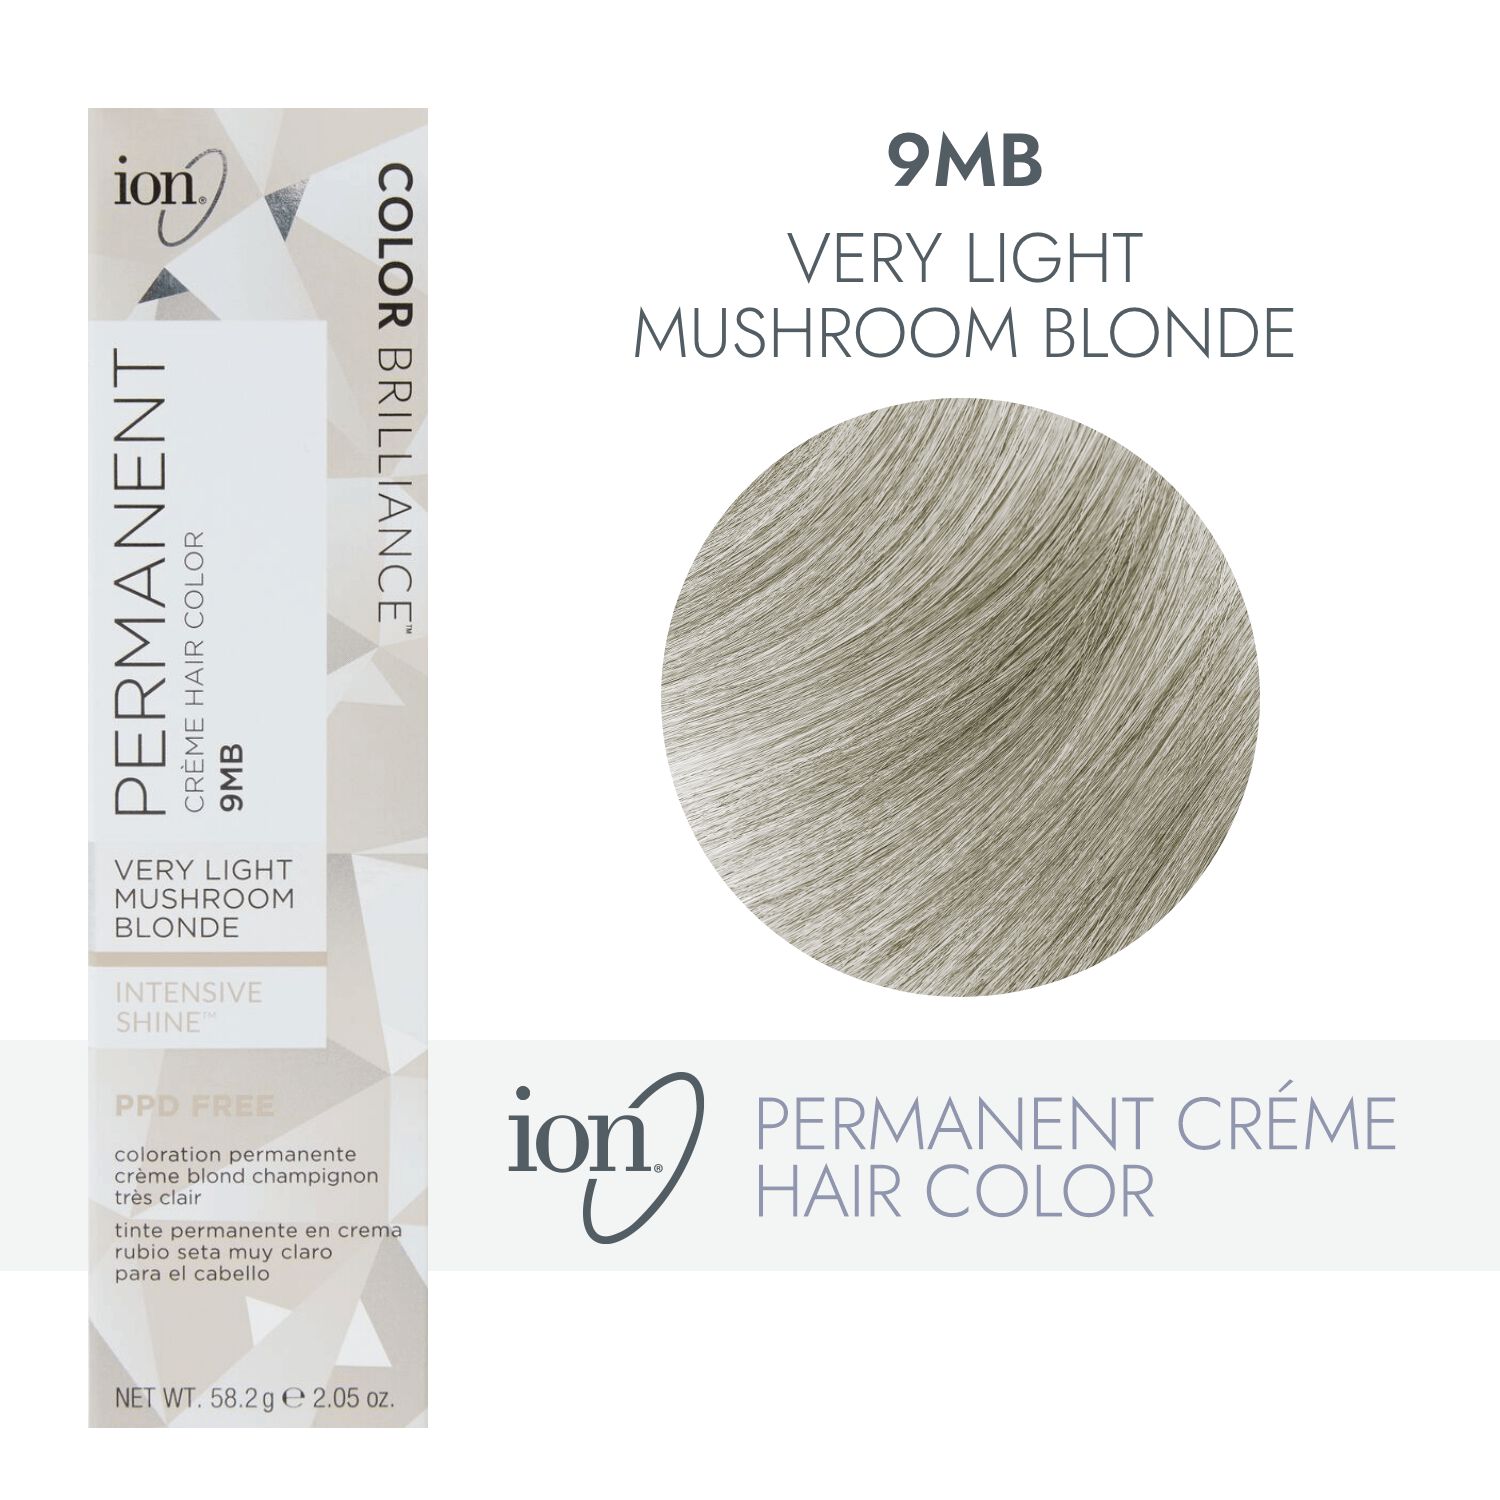 ion 9MB Very Light Mushroom Blonde Permanent Creme Hair Color by Color